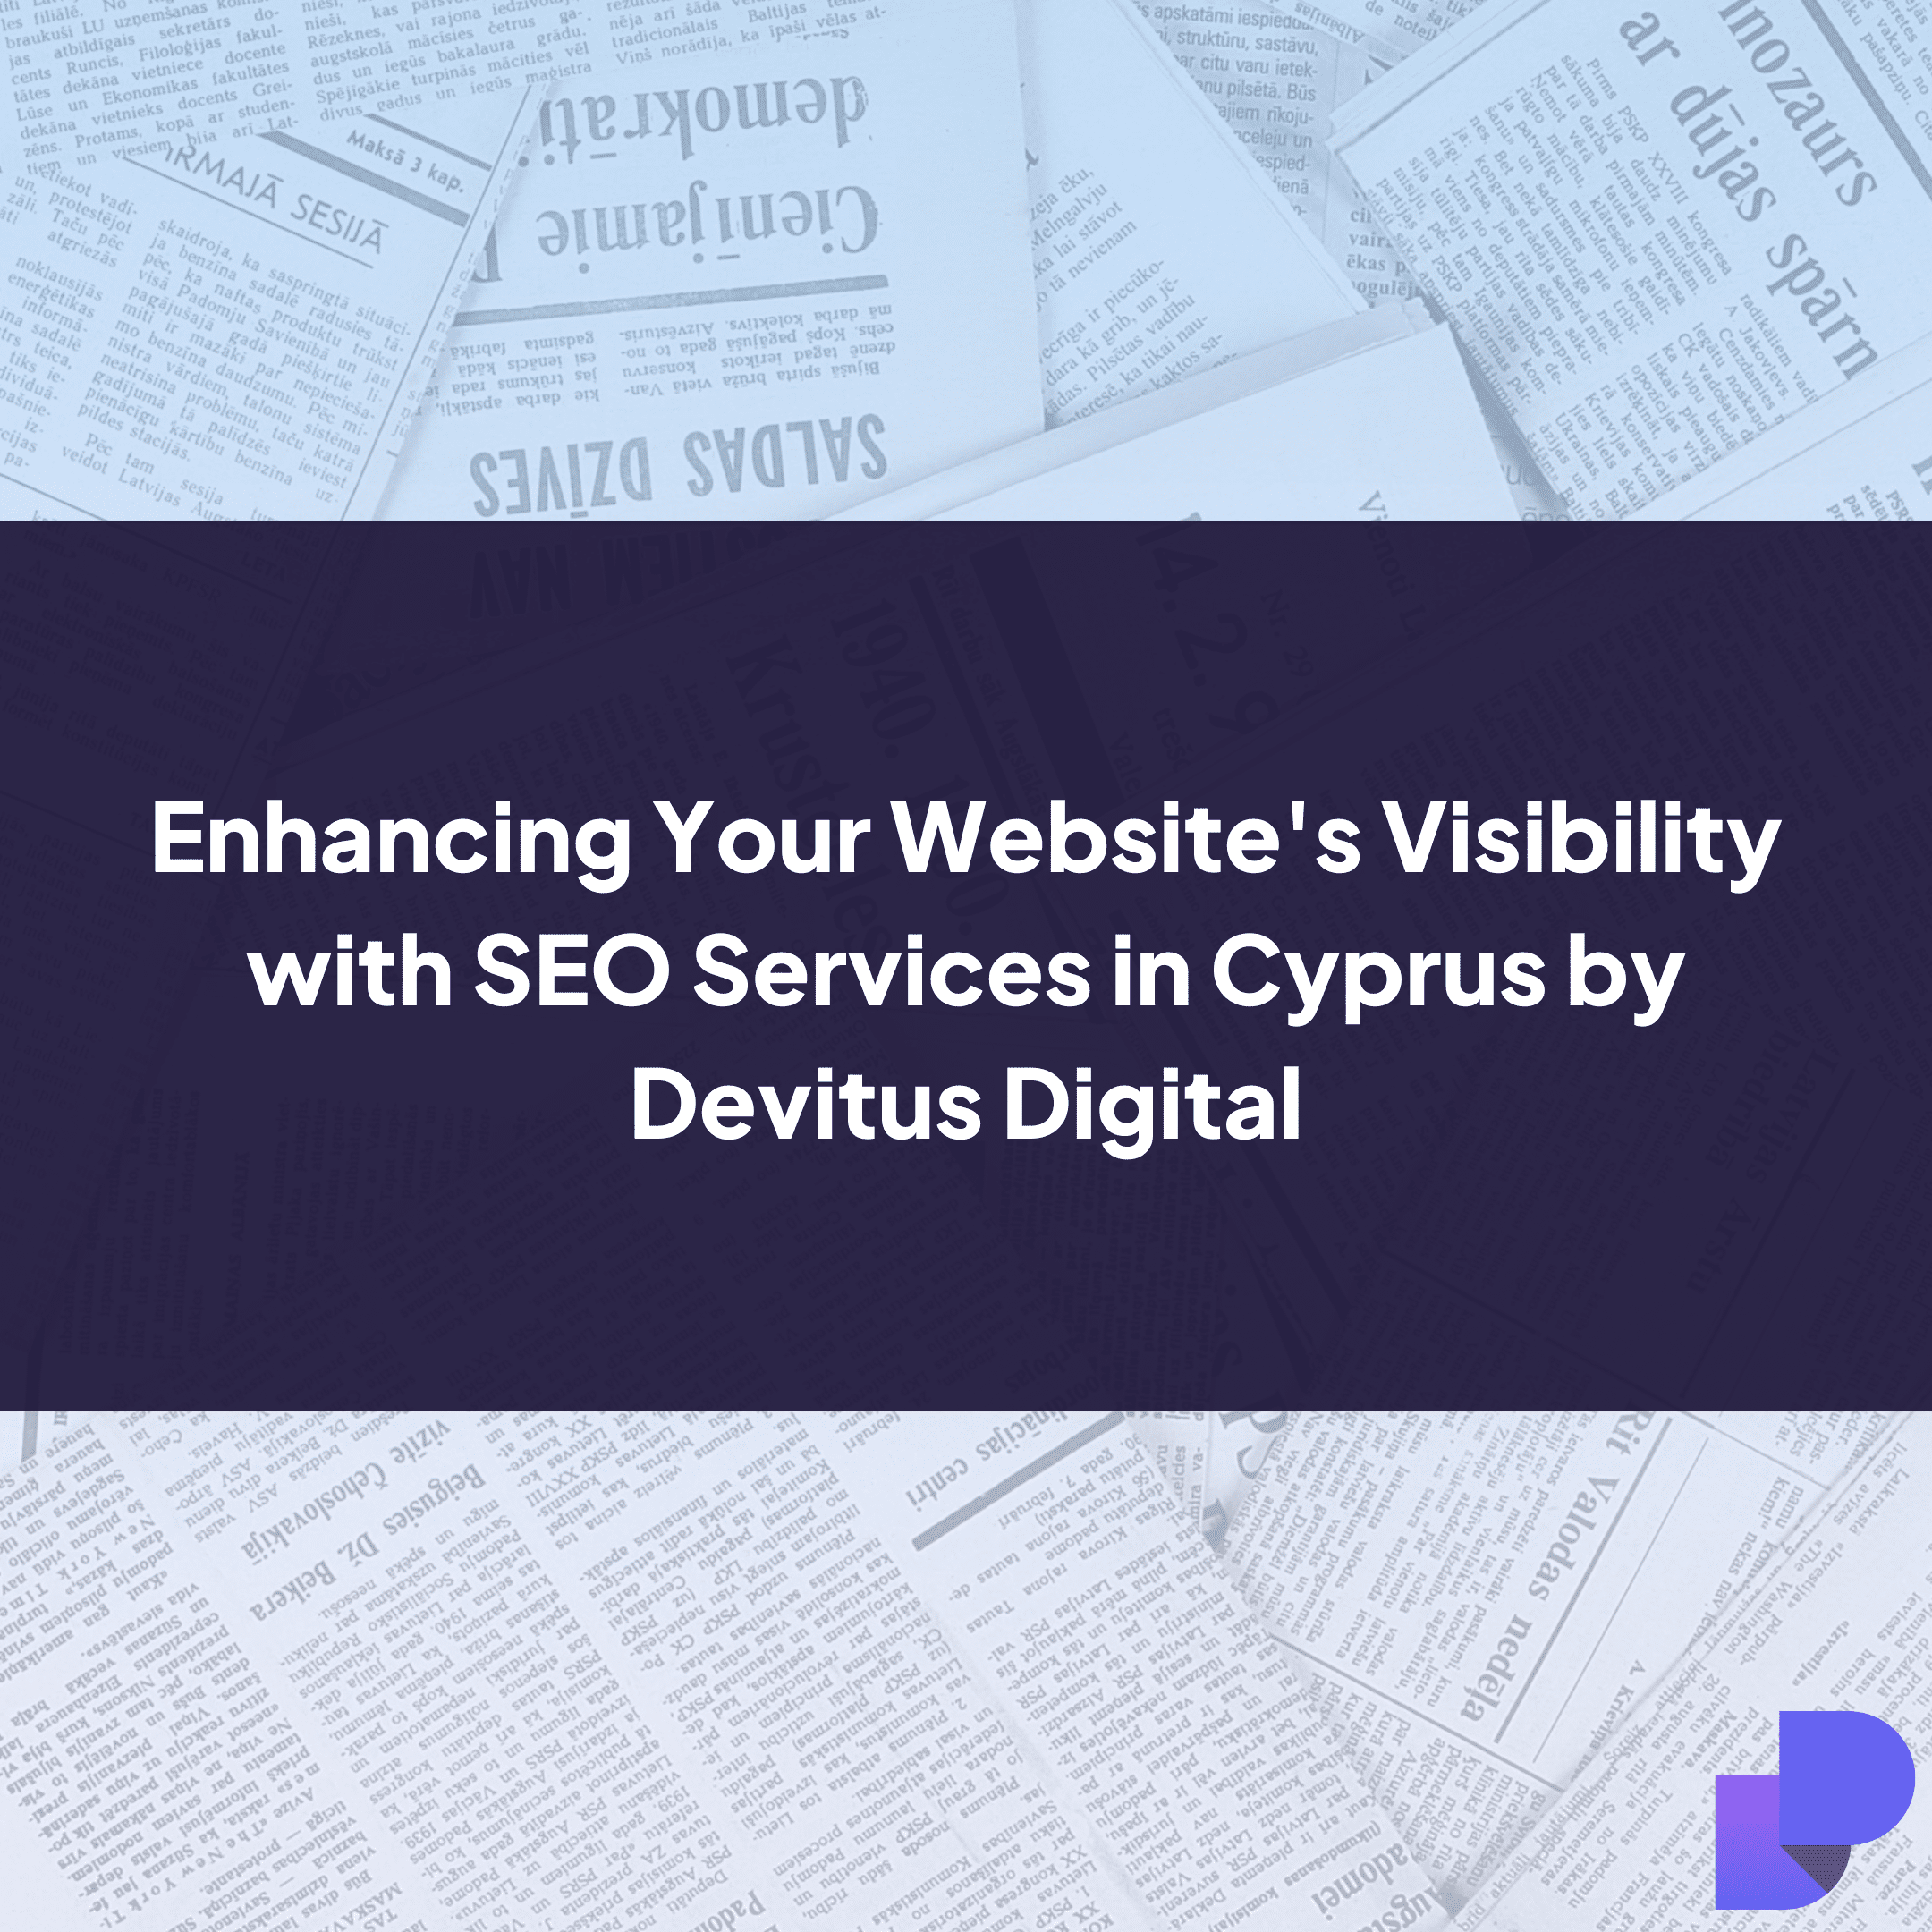 Enhancing Your Website's Visibility with SEO Services in Cyprus by Devitus Digital